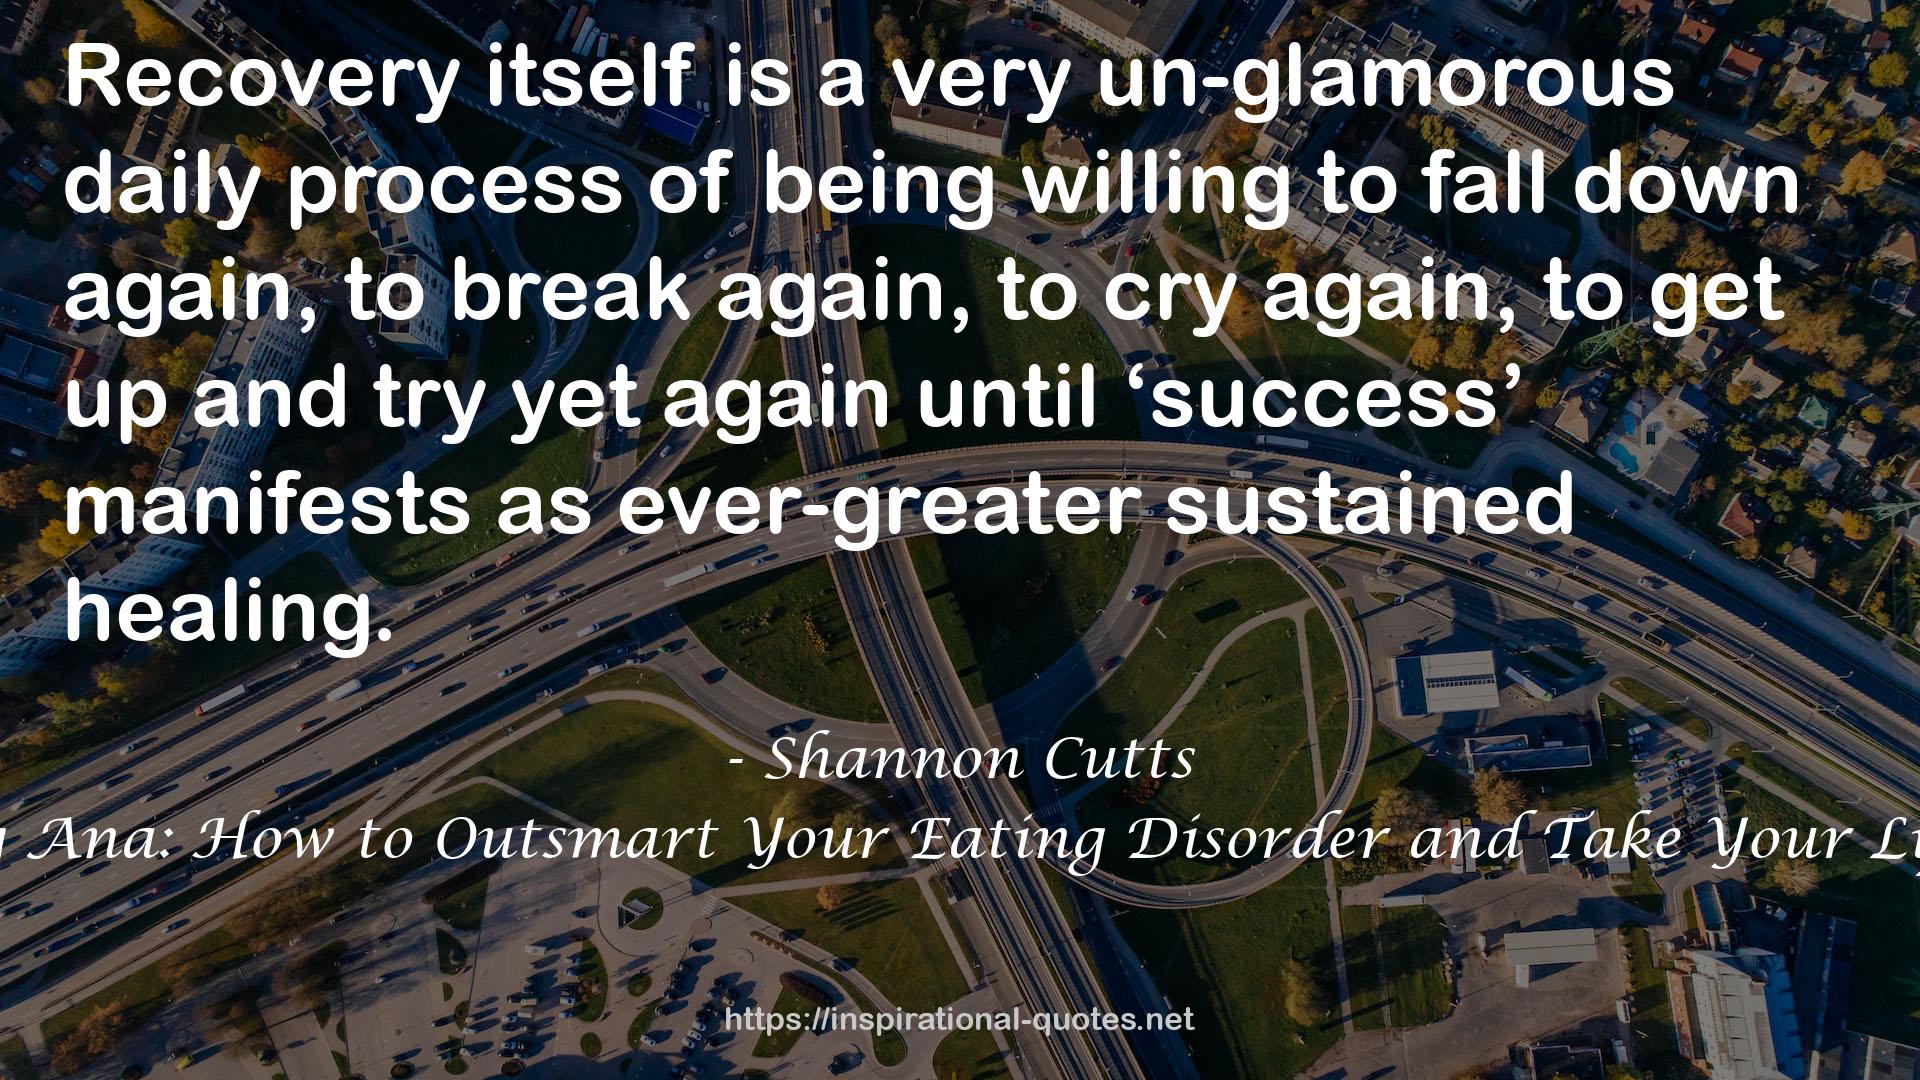 Shannon Cutts QUOTES